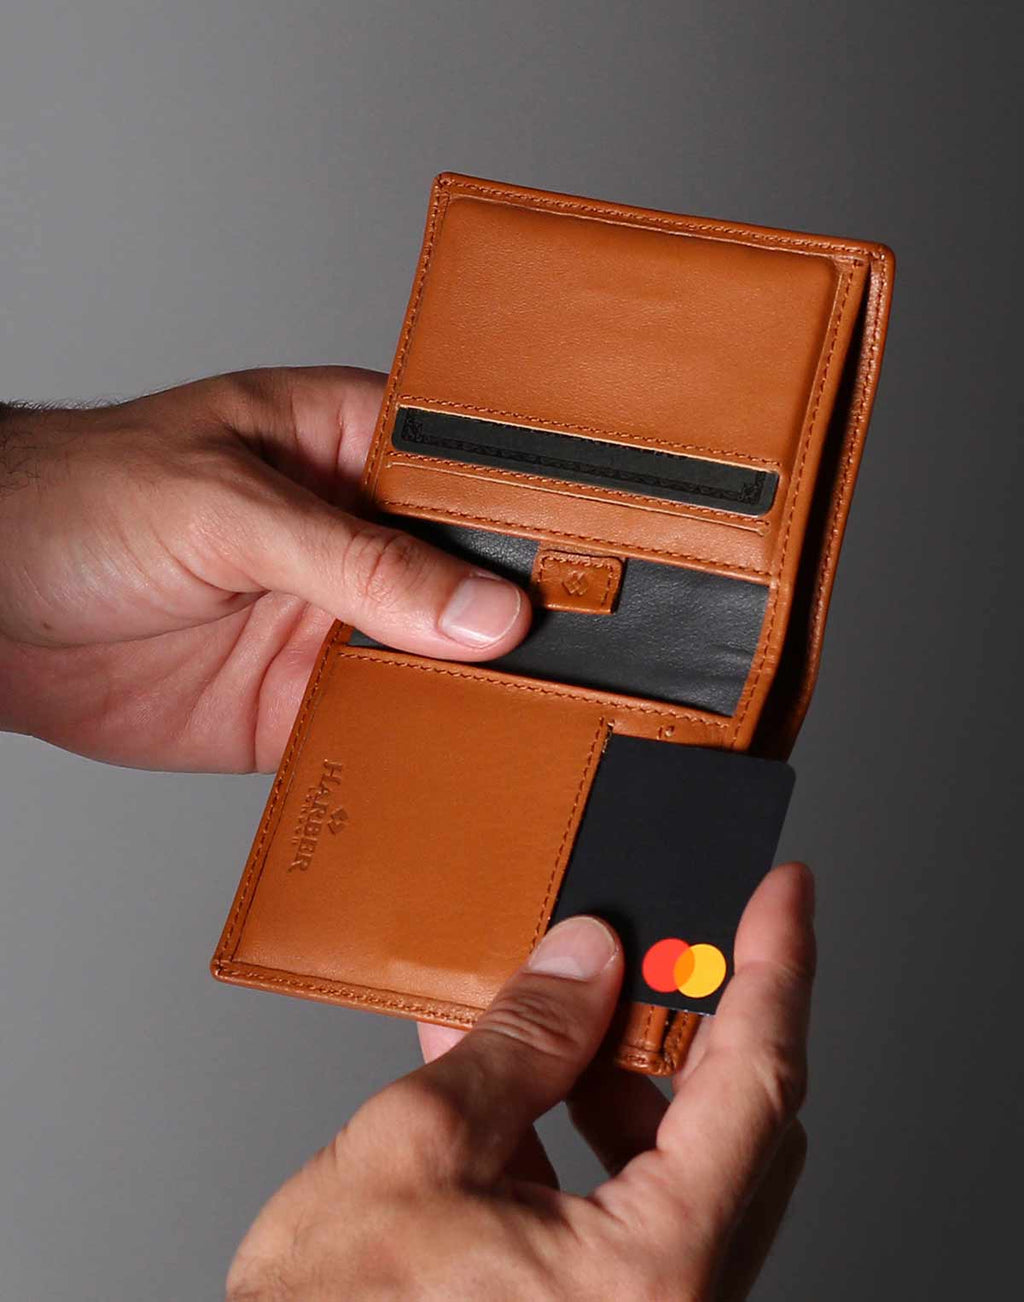 Slender Wallet - Luxury All Wallets and Small Leather Goods